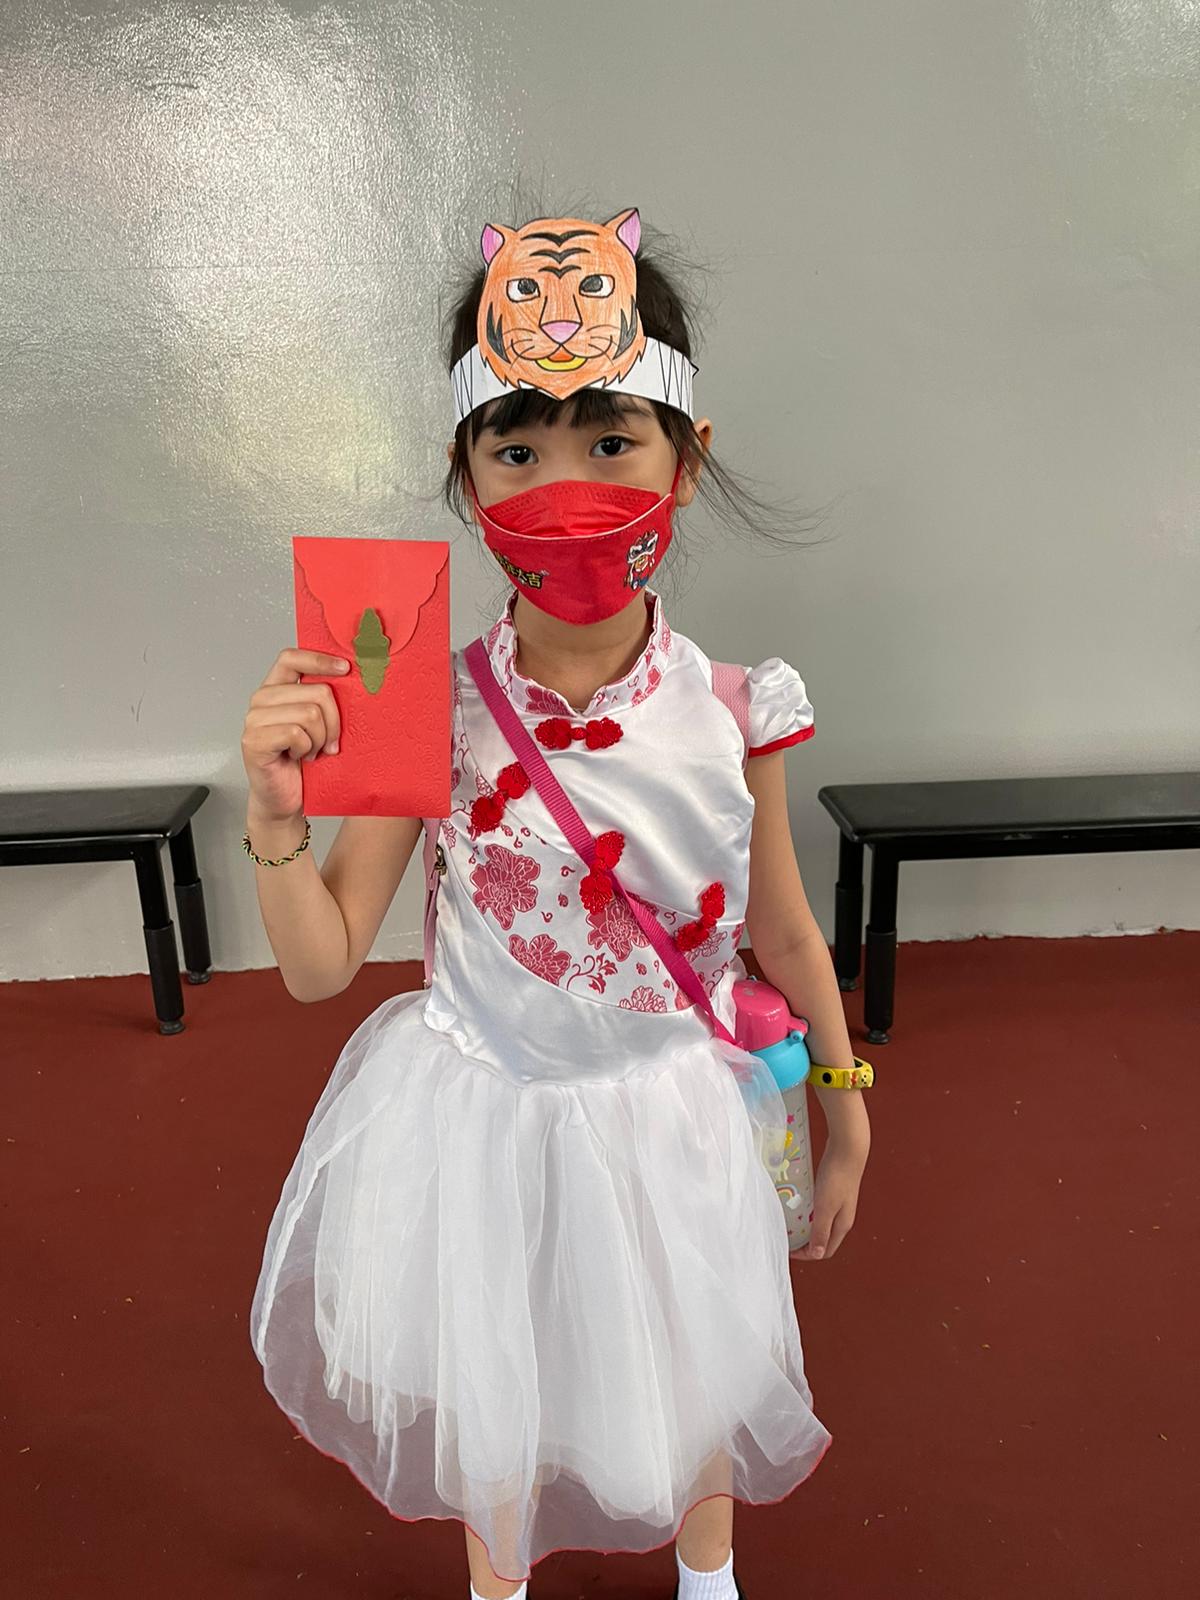 Student welcoming the Year of Tiger with her Tiger head band and Ang Bao